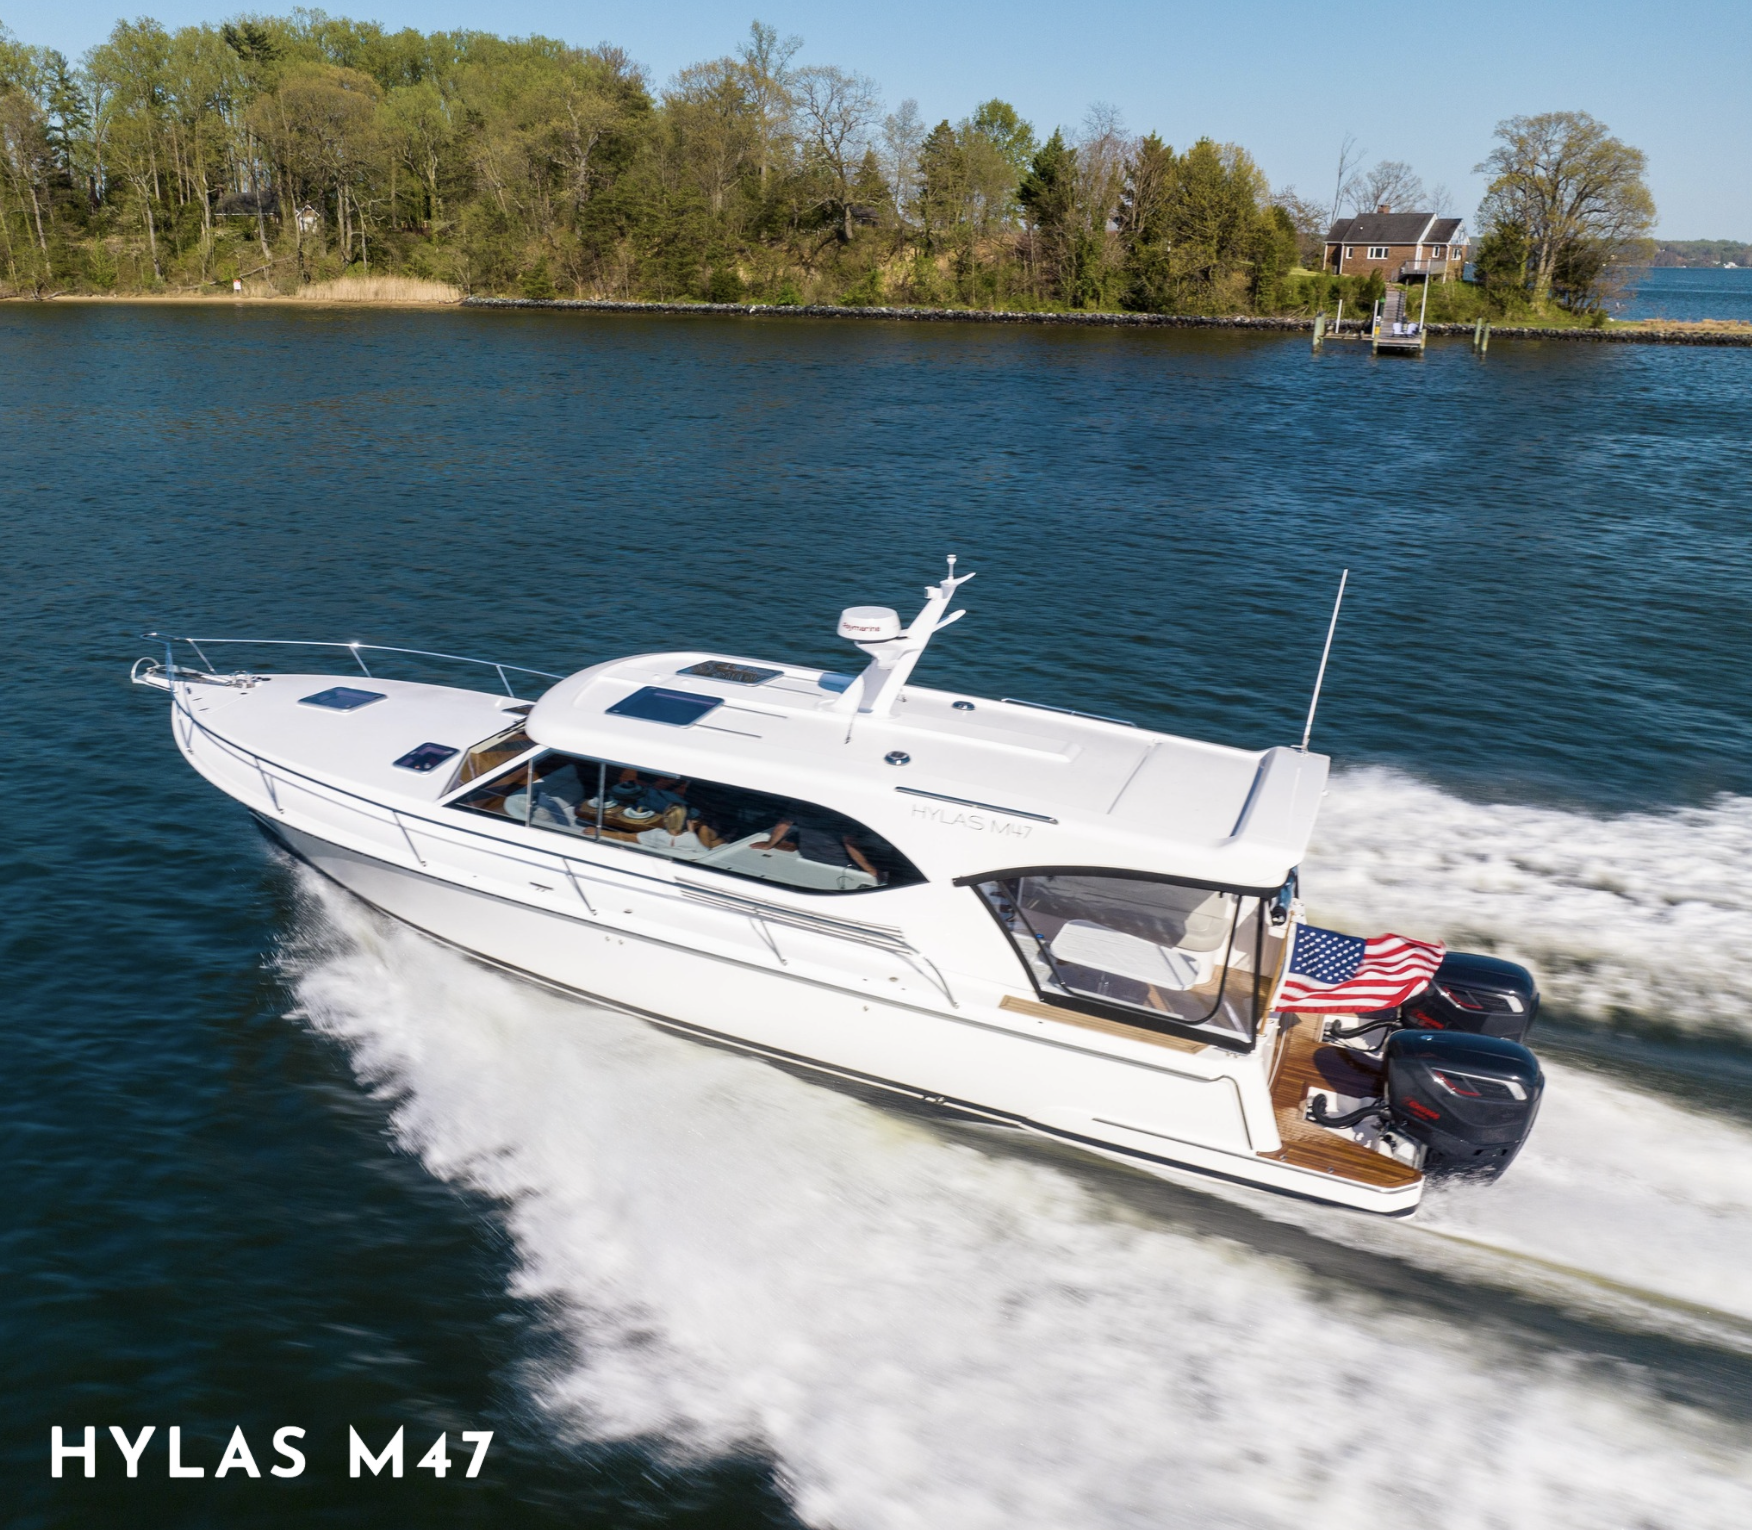 Hylas M47: The Perfect Blend of Innovation and Comfort